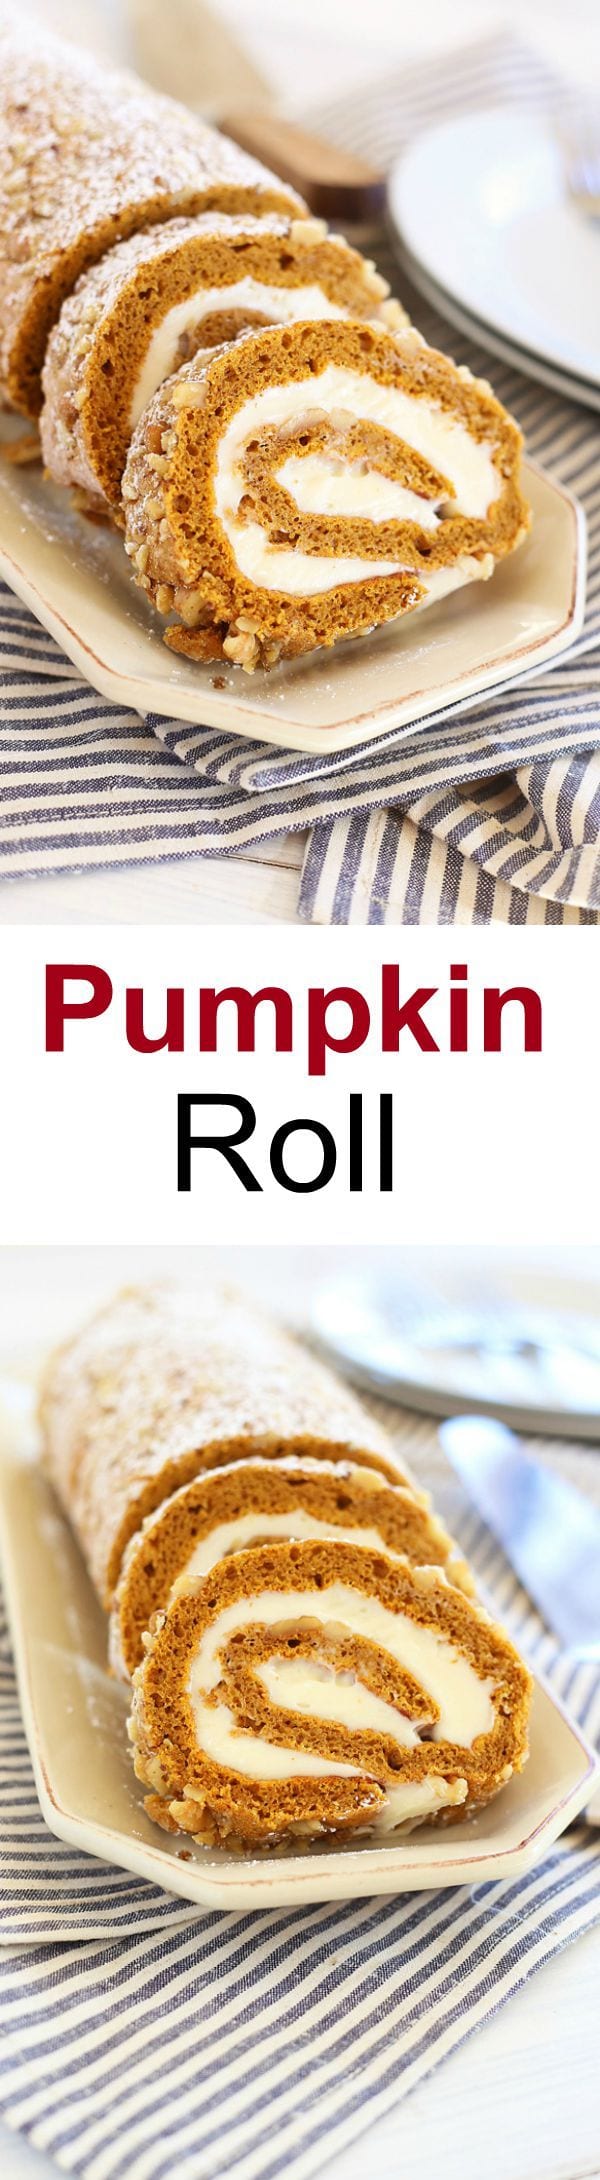 Pumpkin Roll – topped with walnuts with sweet cream cheese filling. This is the best and easiest pumpkin roll recipe ever, so decadent! | rasamalaysia.com